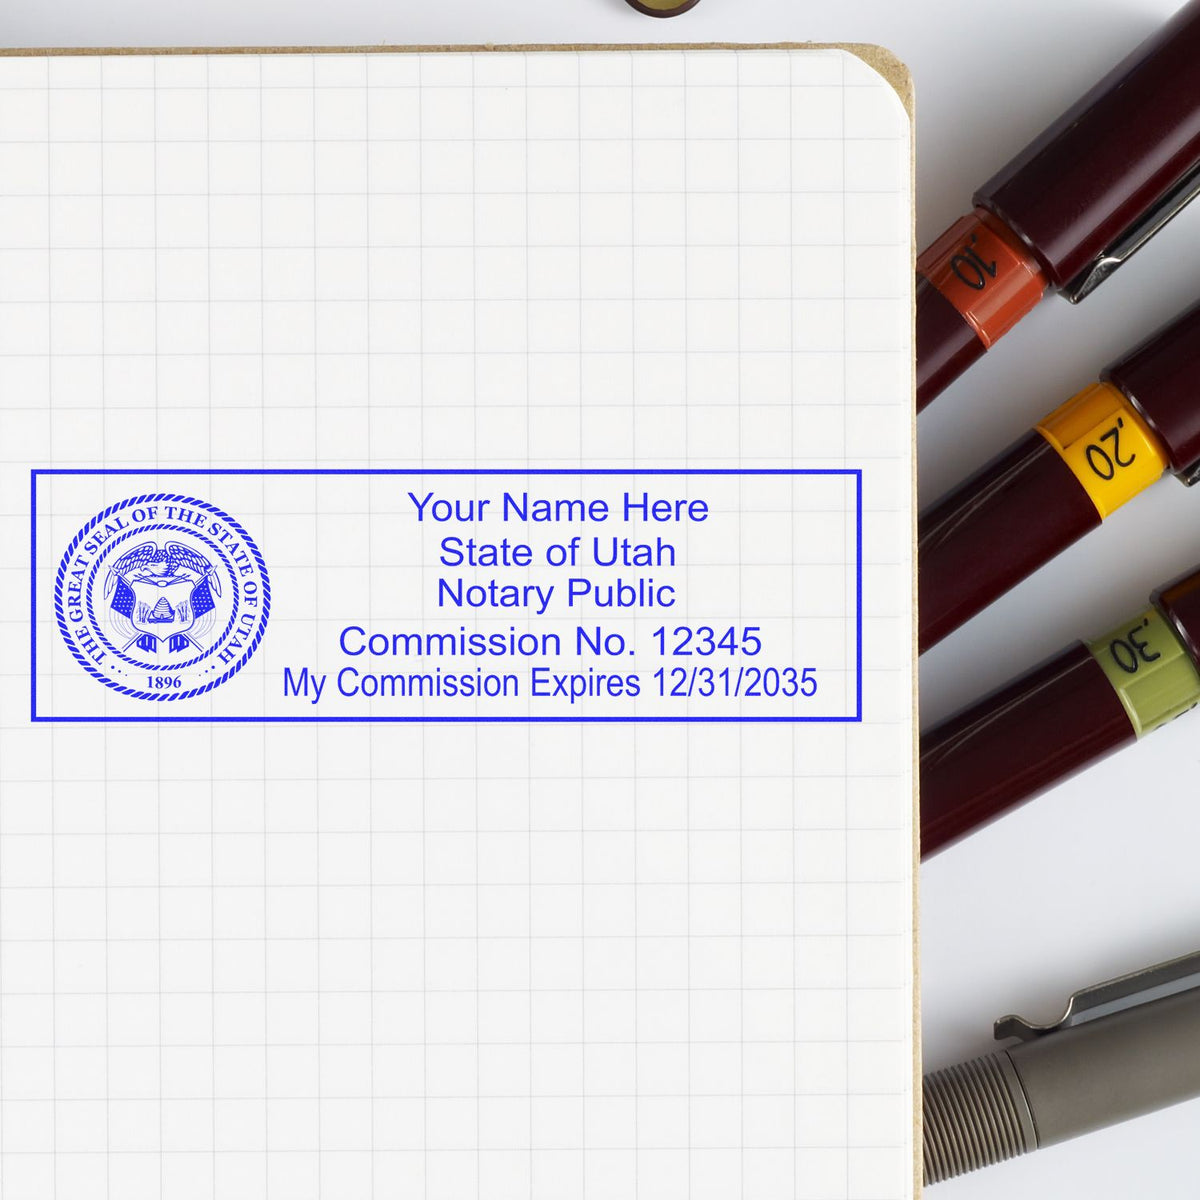 This paper is stamped with a sample imprint of the Wooden Handle Utah State Seal Notary Public Stamp, signifying its quality and reliability.